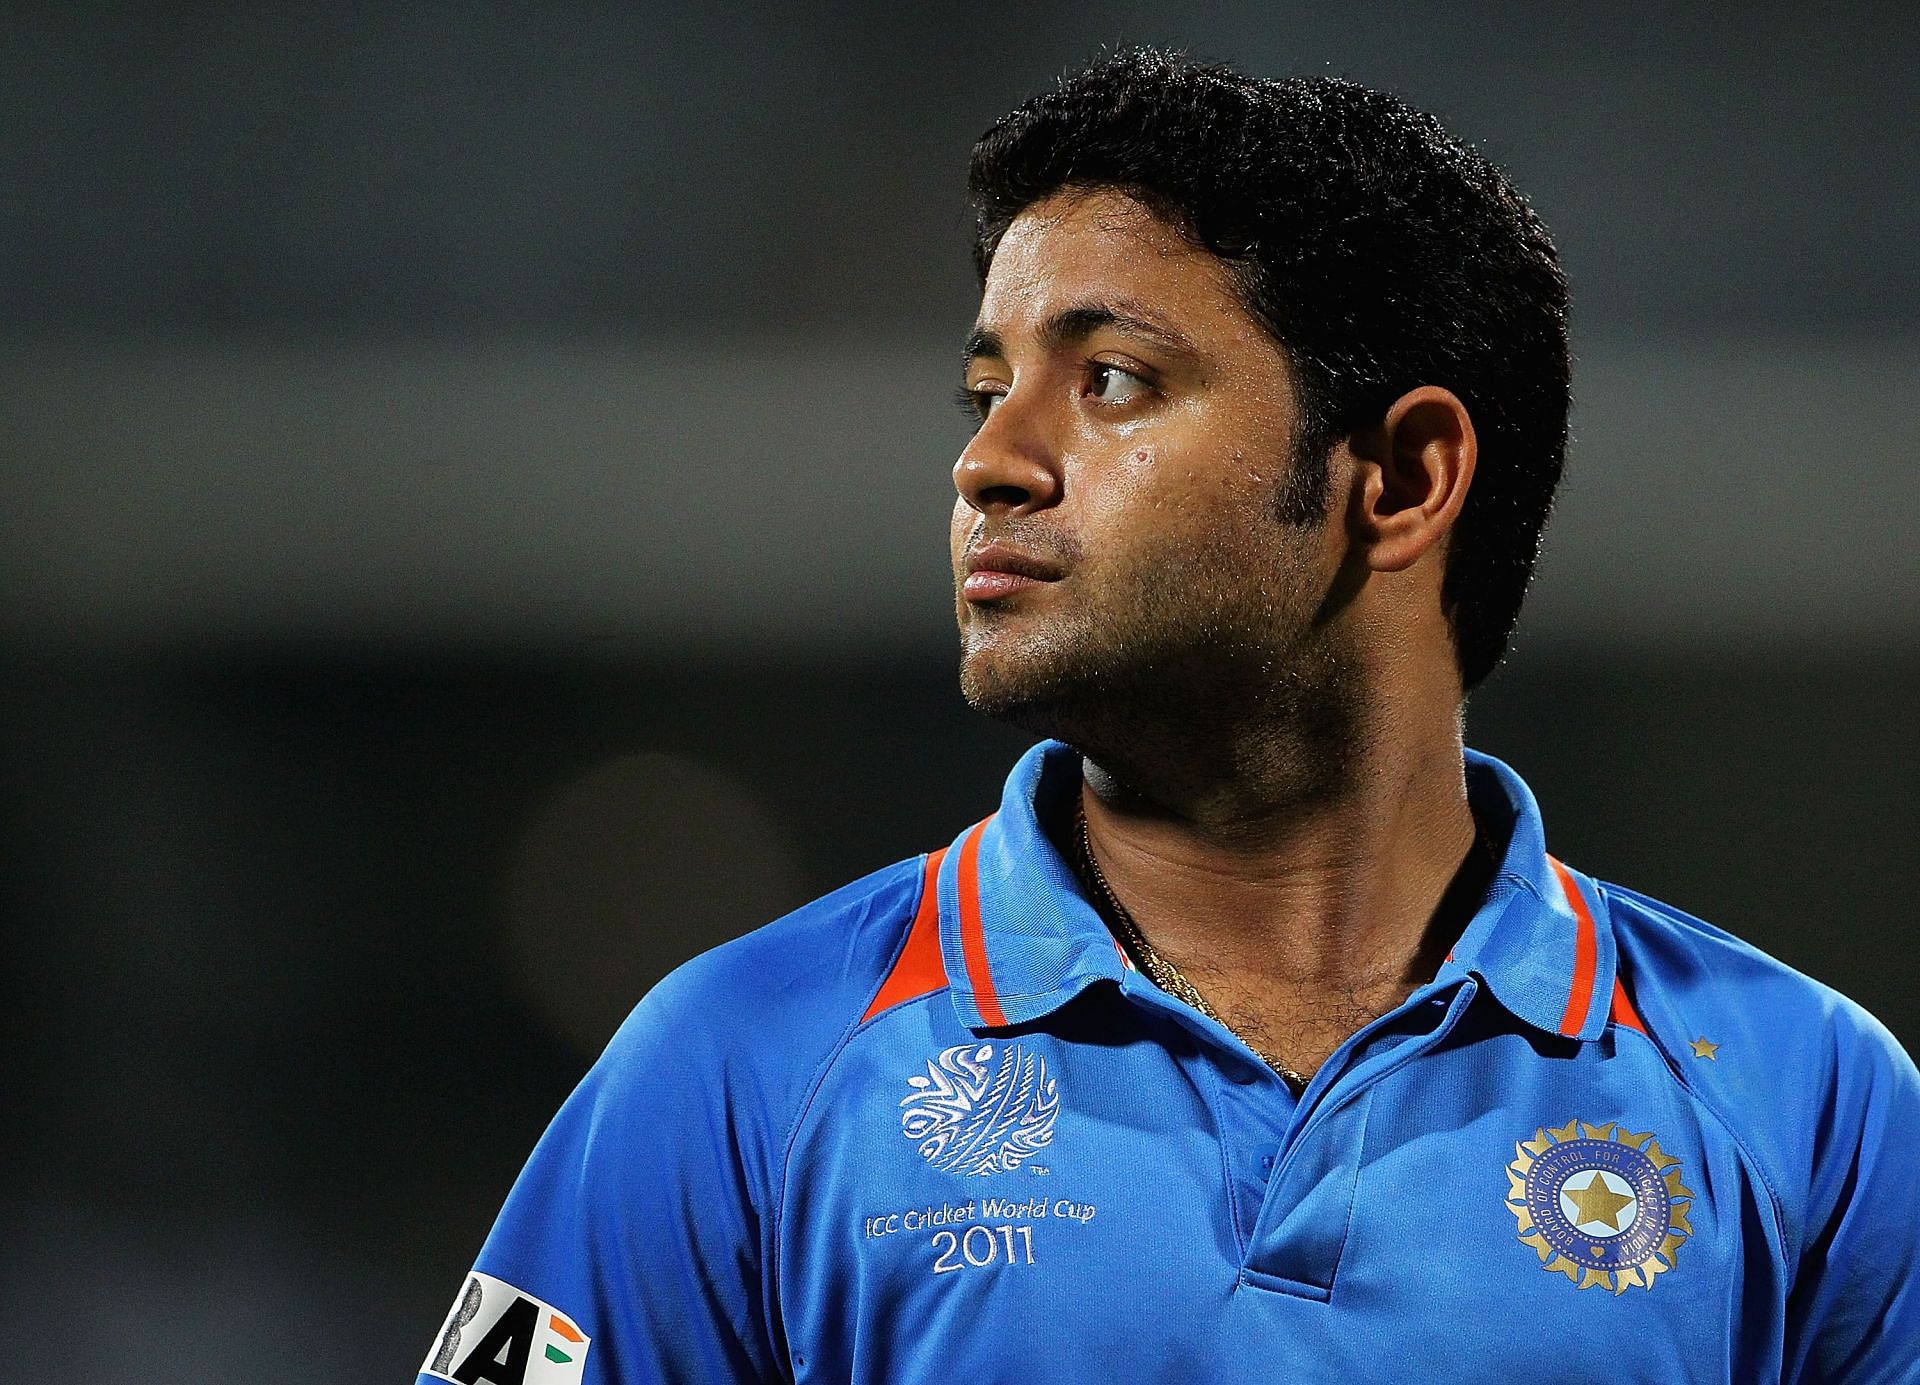 Piyush Chawla turned the match around with an inspired spell in IPL 2012